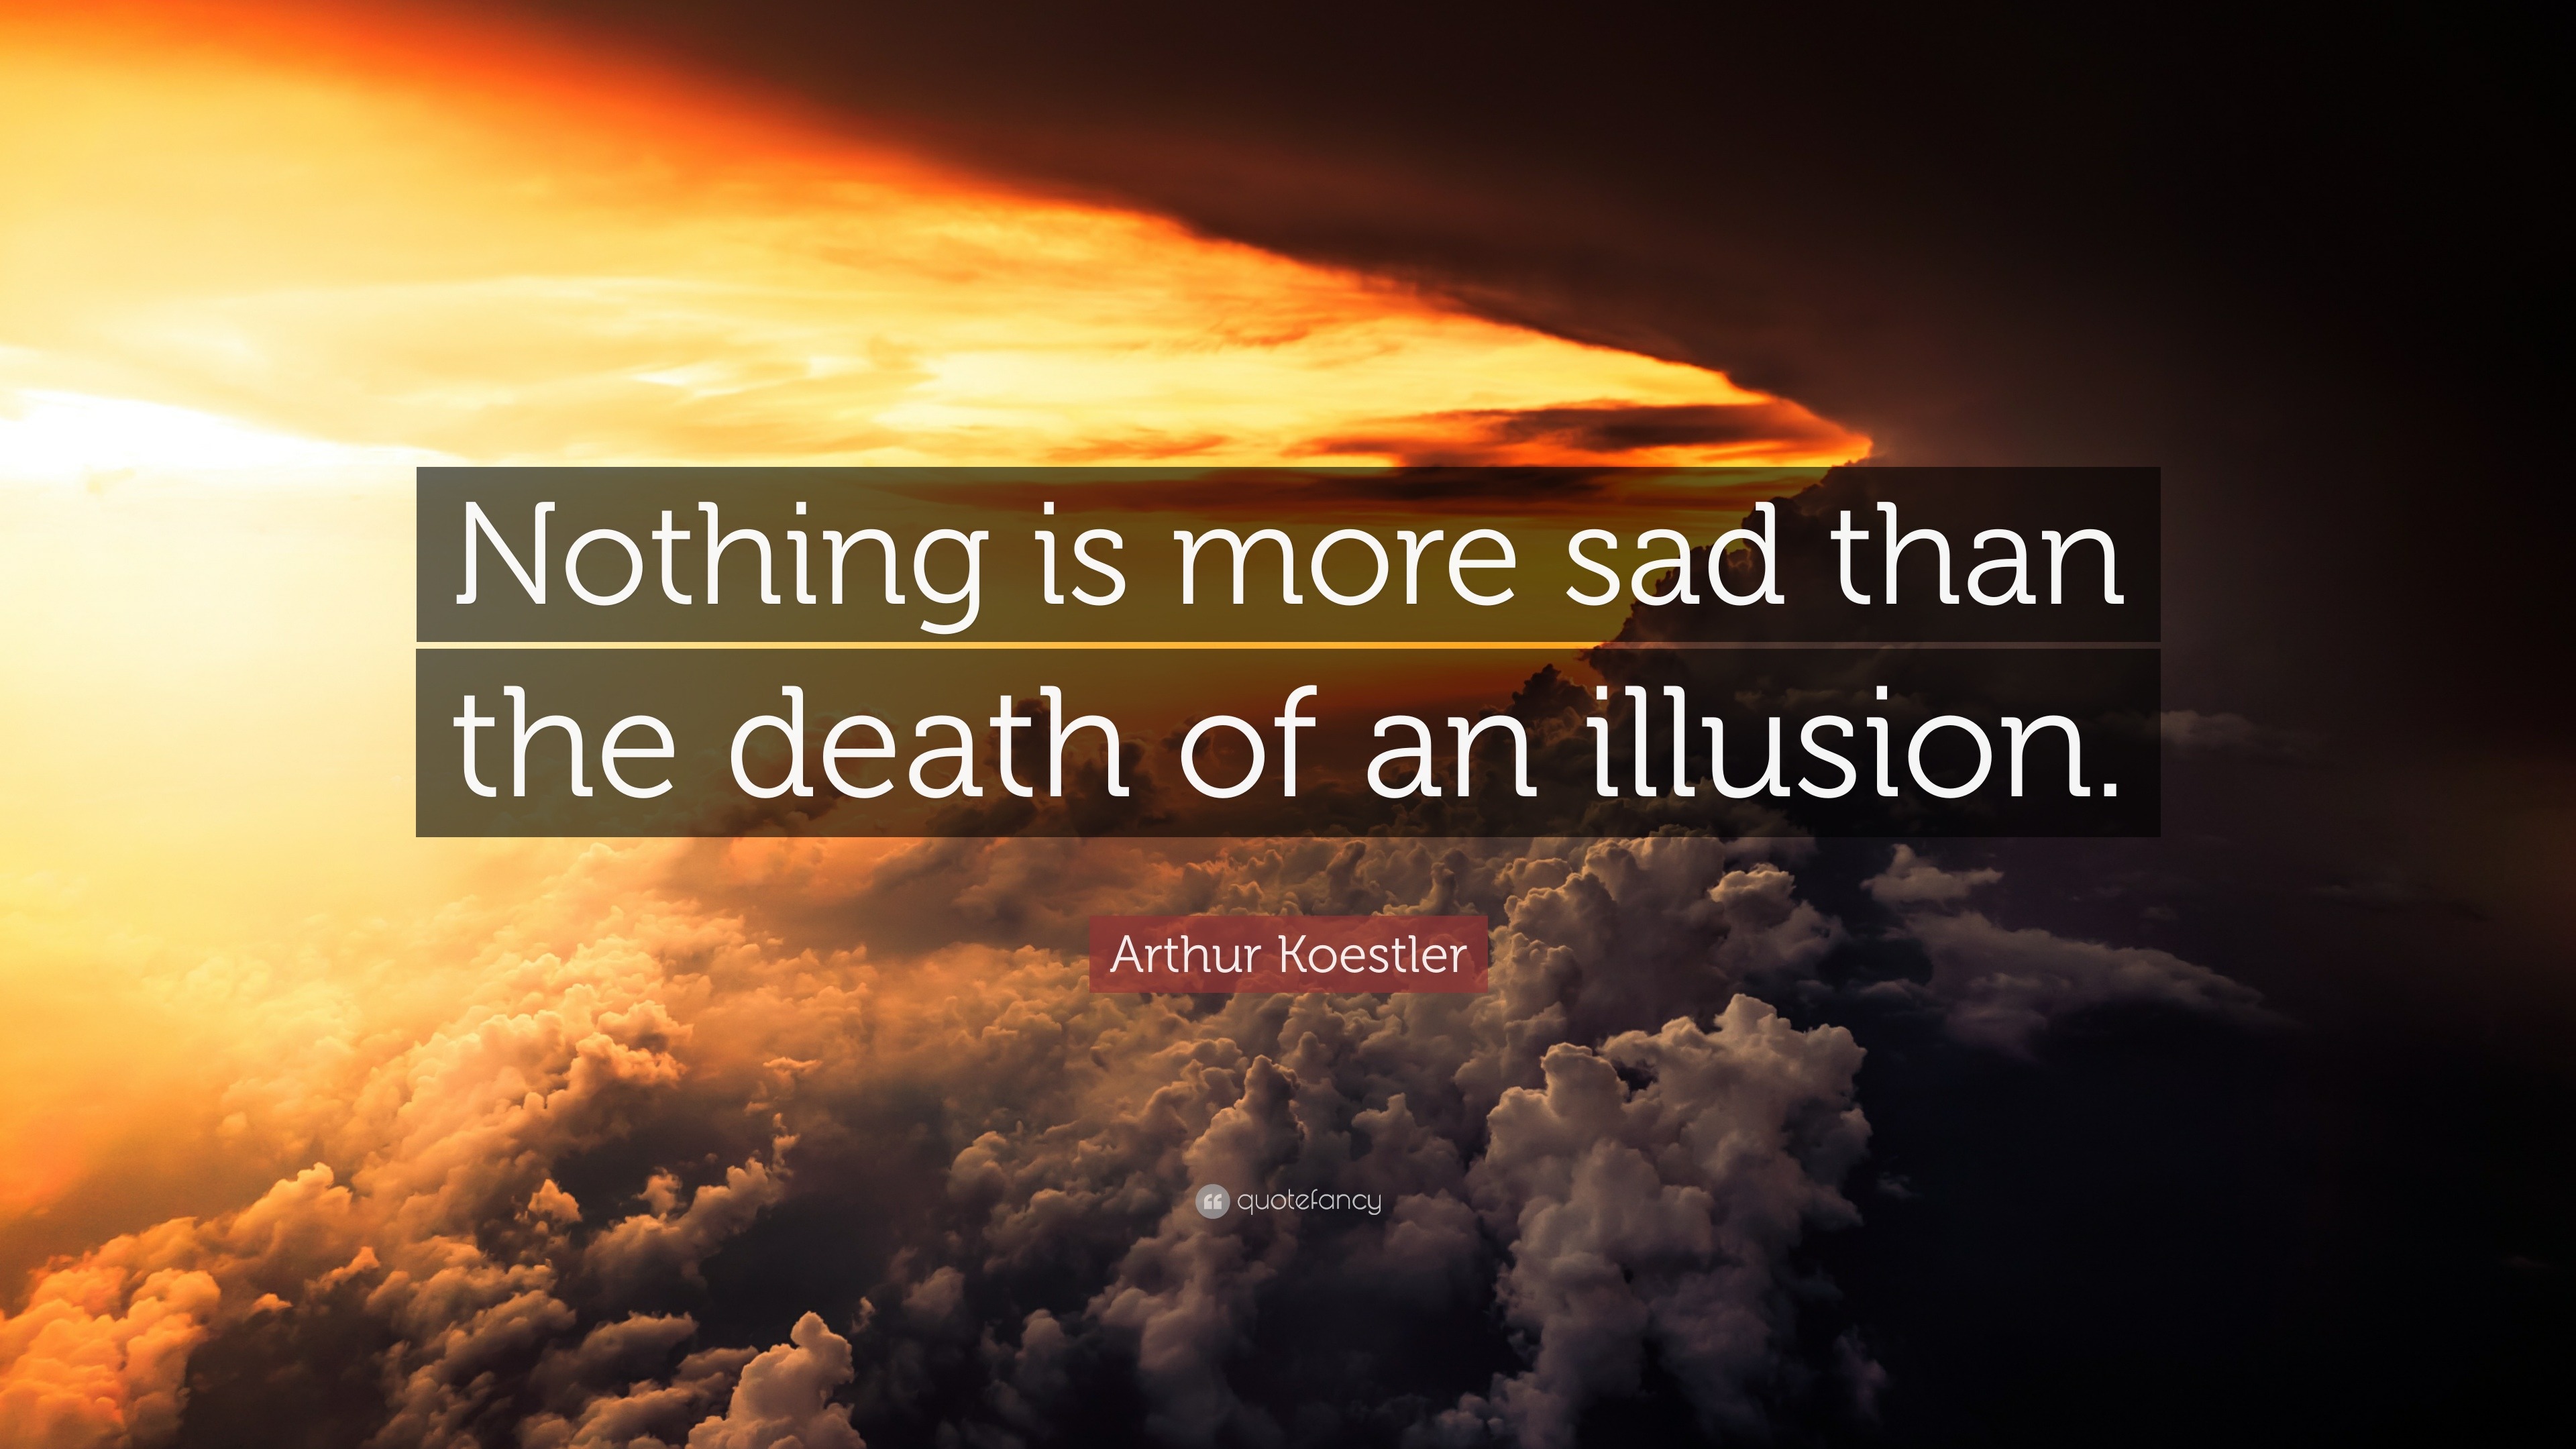 Arthur Koestler Quote “Nothing is more sad than the death